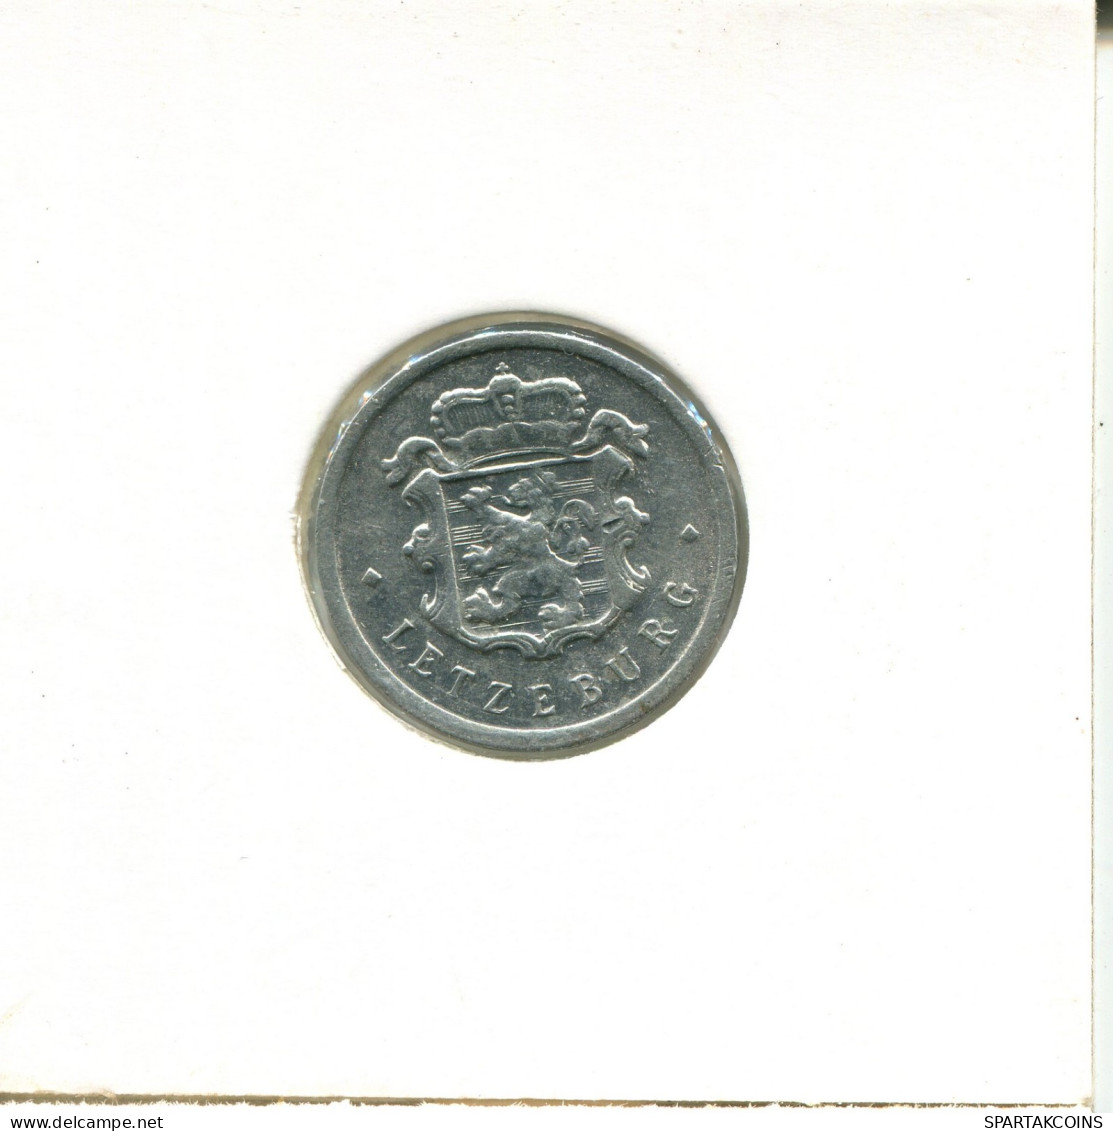 25 CENTIMES 1968 LUXEMBURG LUXEMBOURG Münze #AW651.D.A - Lussemburgo